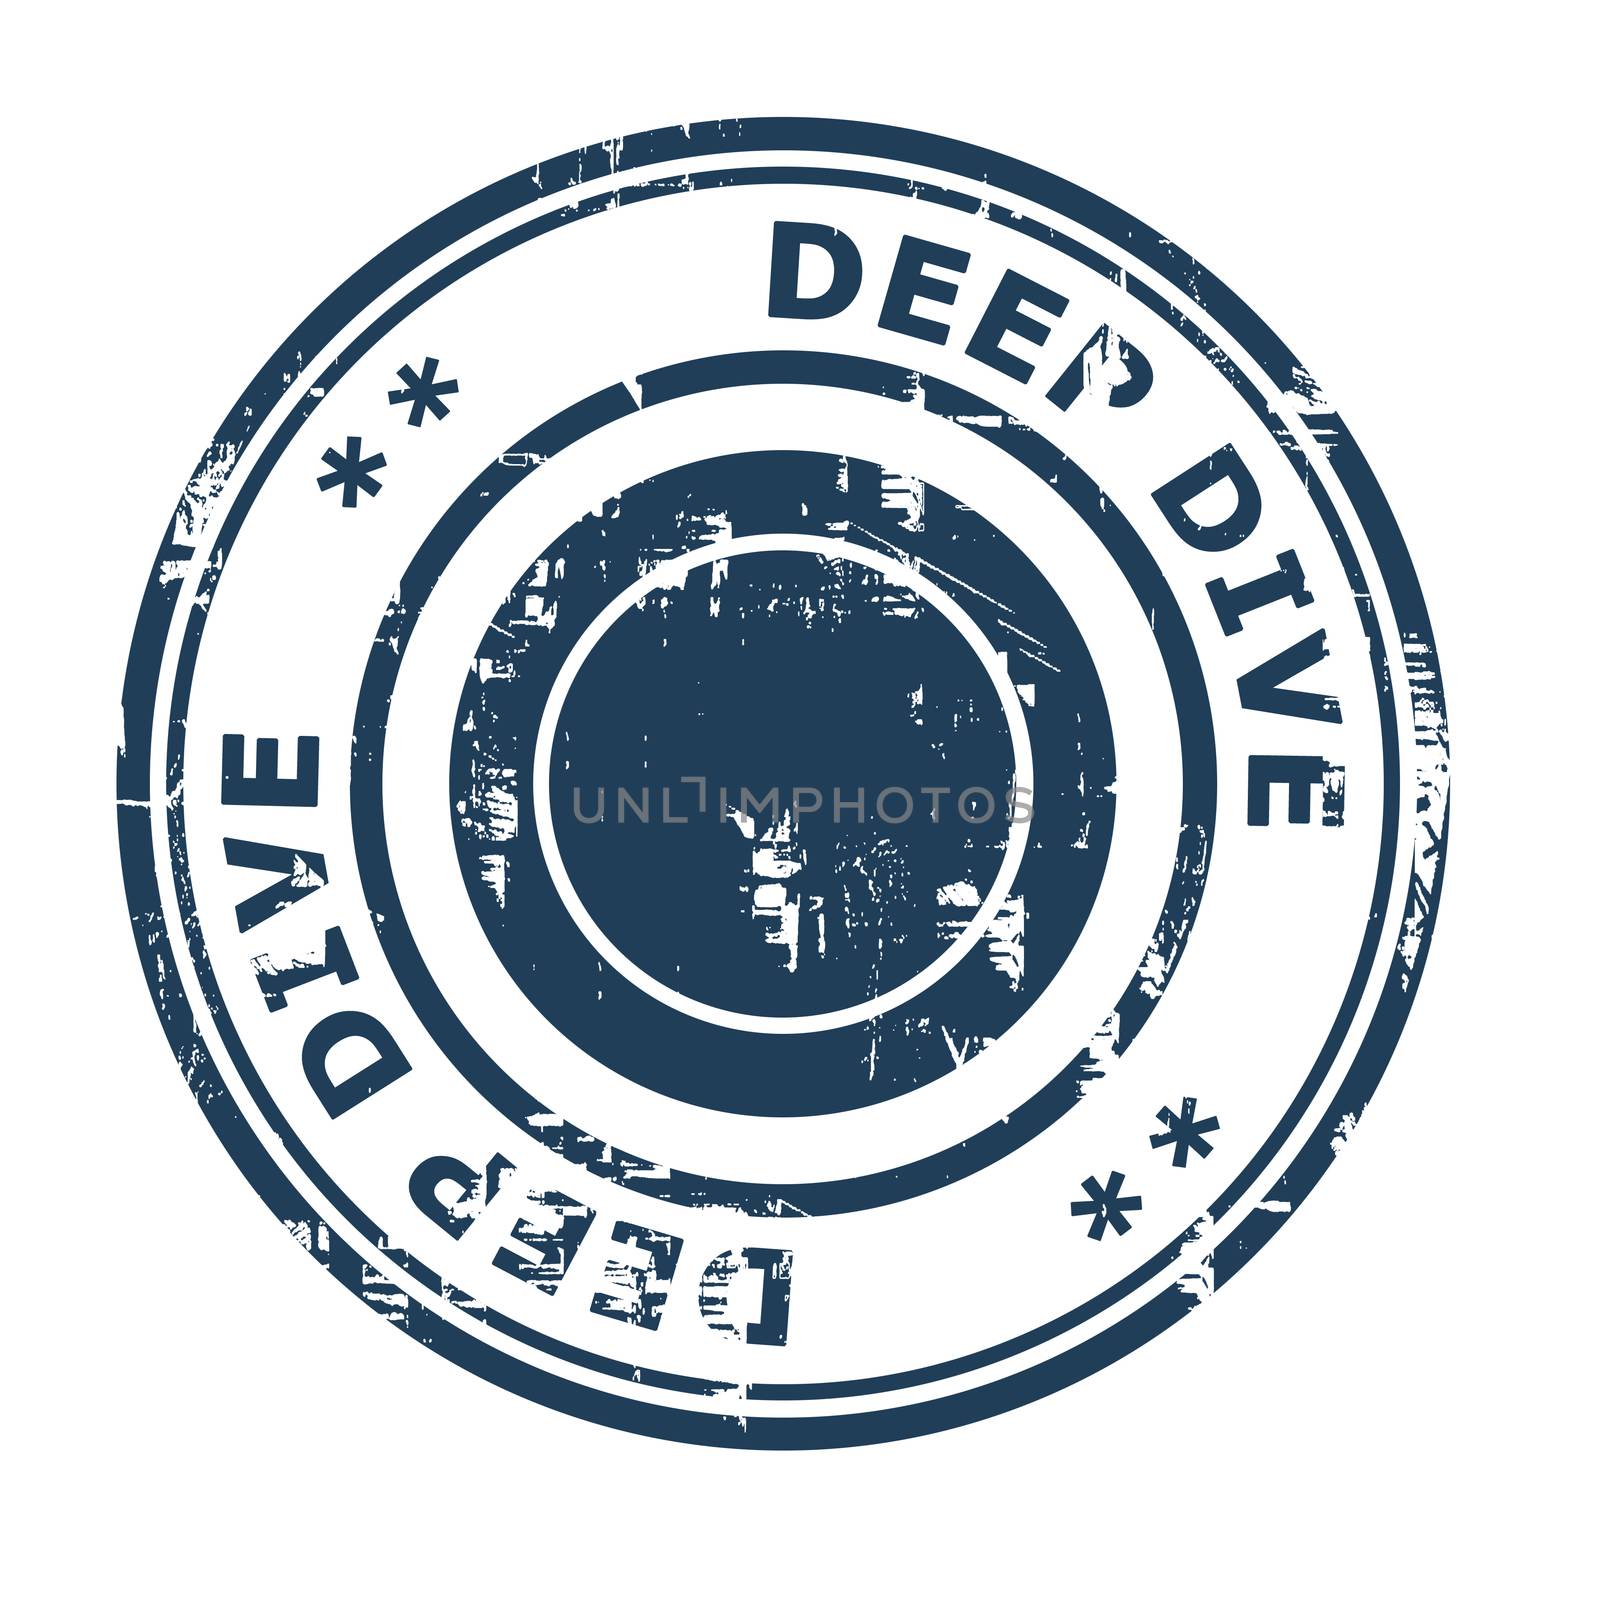 Deep Dive business concept rubber stamp isolated on a white background.